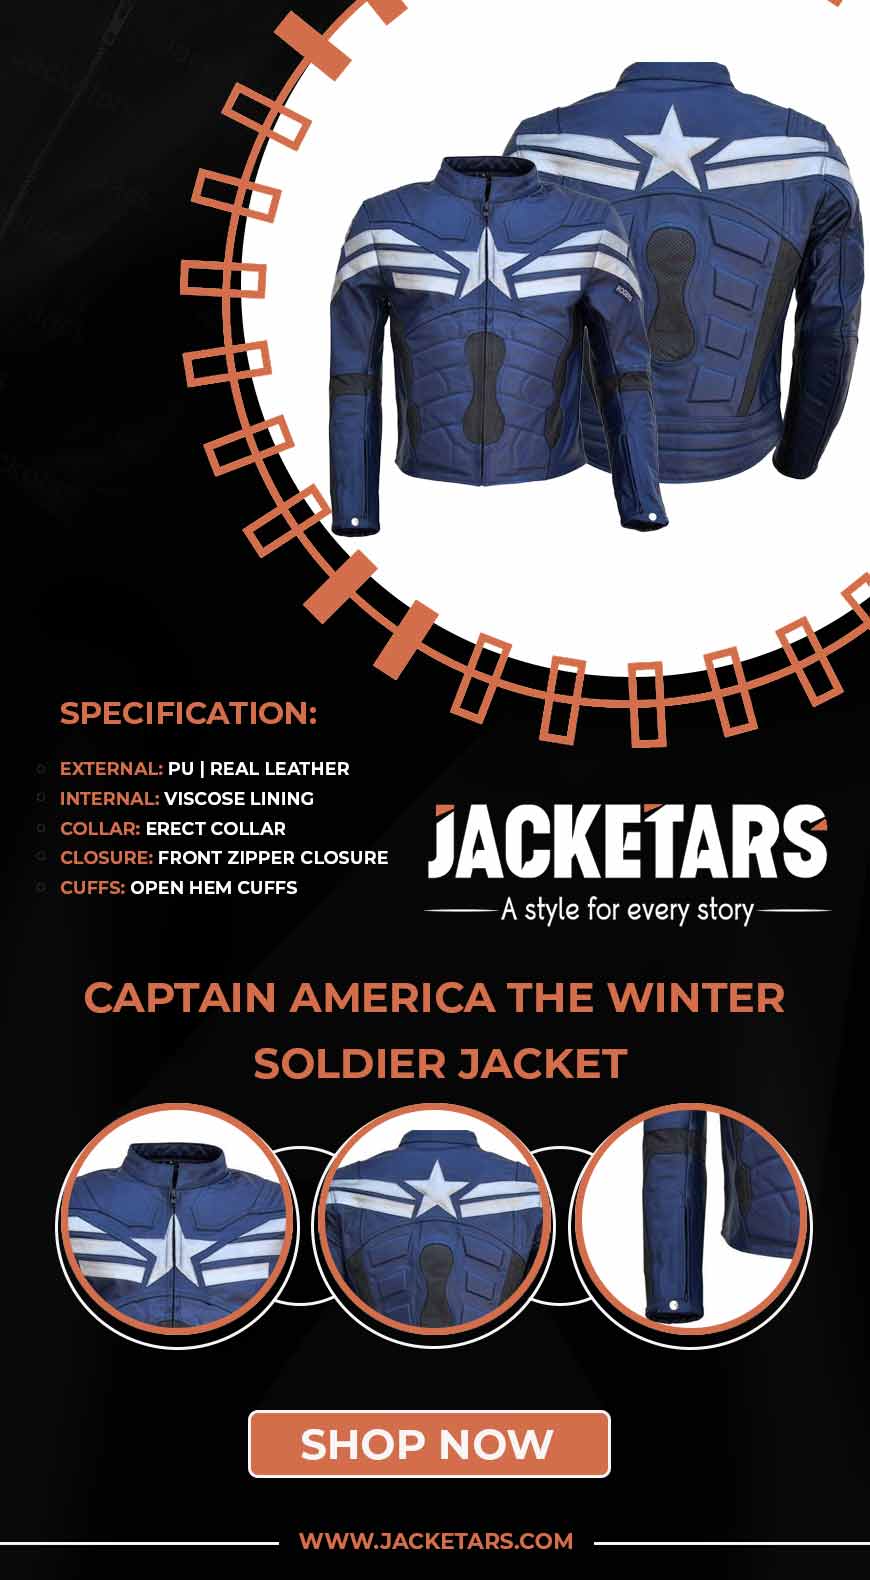 Captain America The Winter Soldier Jacket Info